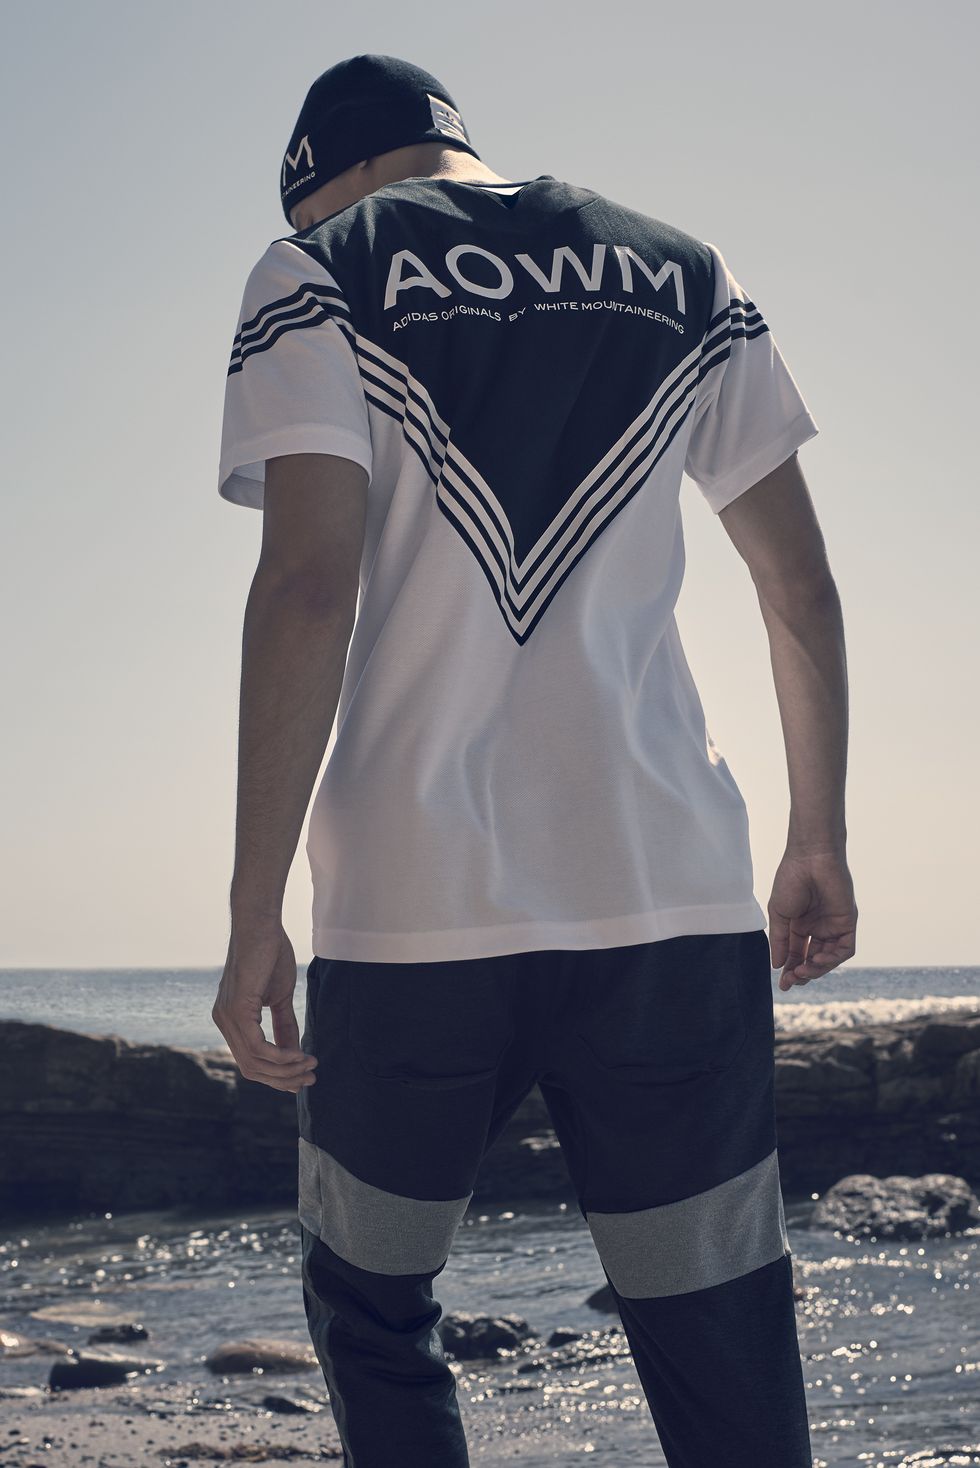 rutine hovedvej Agent Here's Your First Look at the Latest from Adidas and White Mountaineering